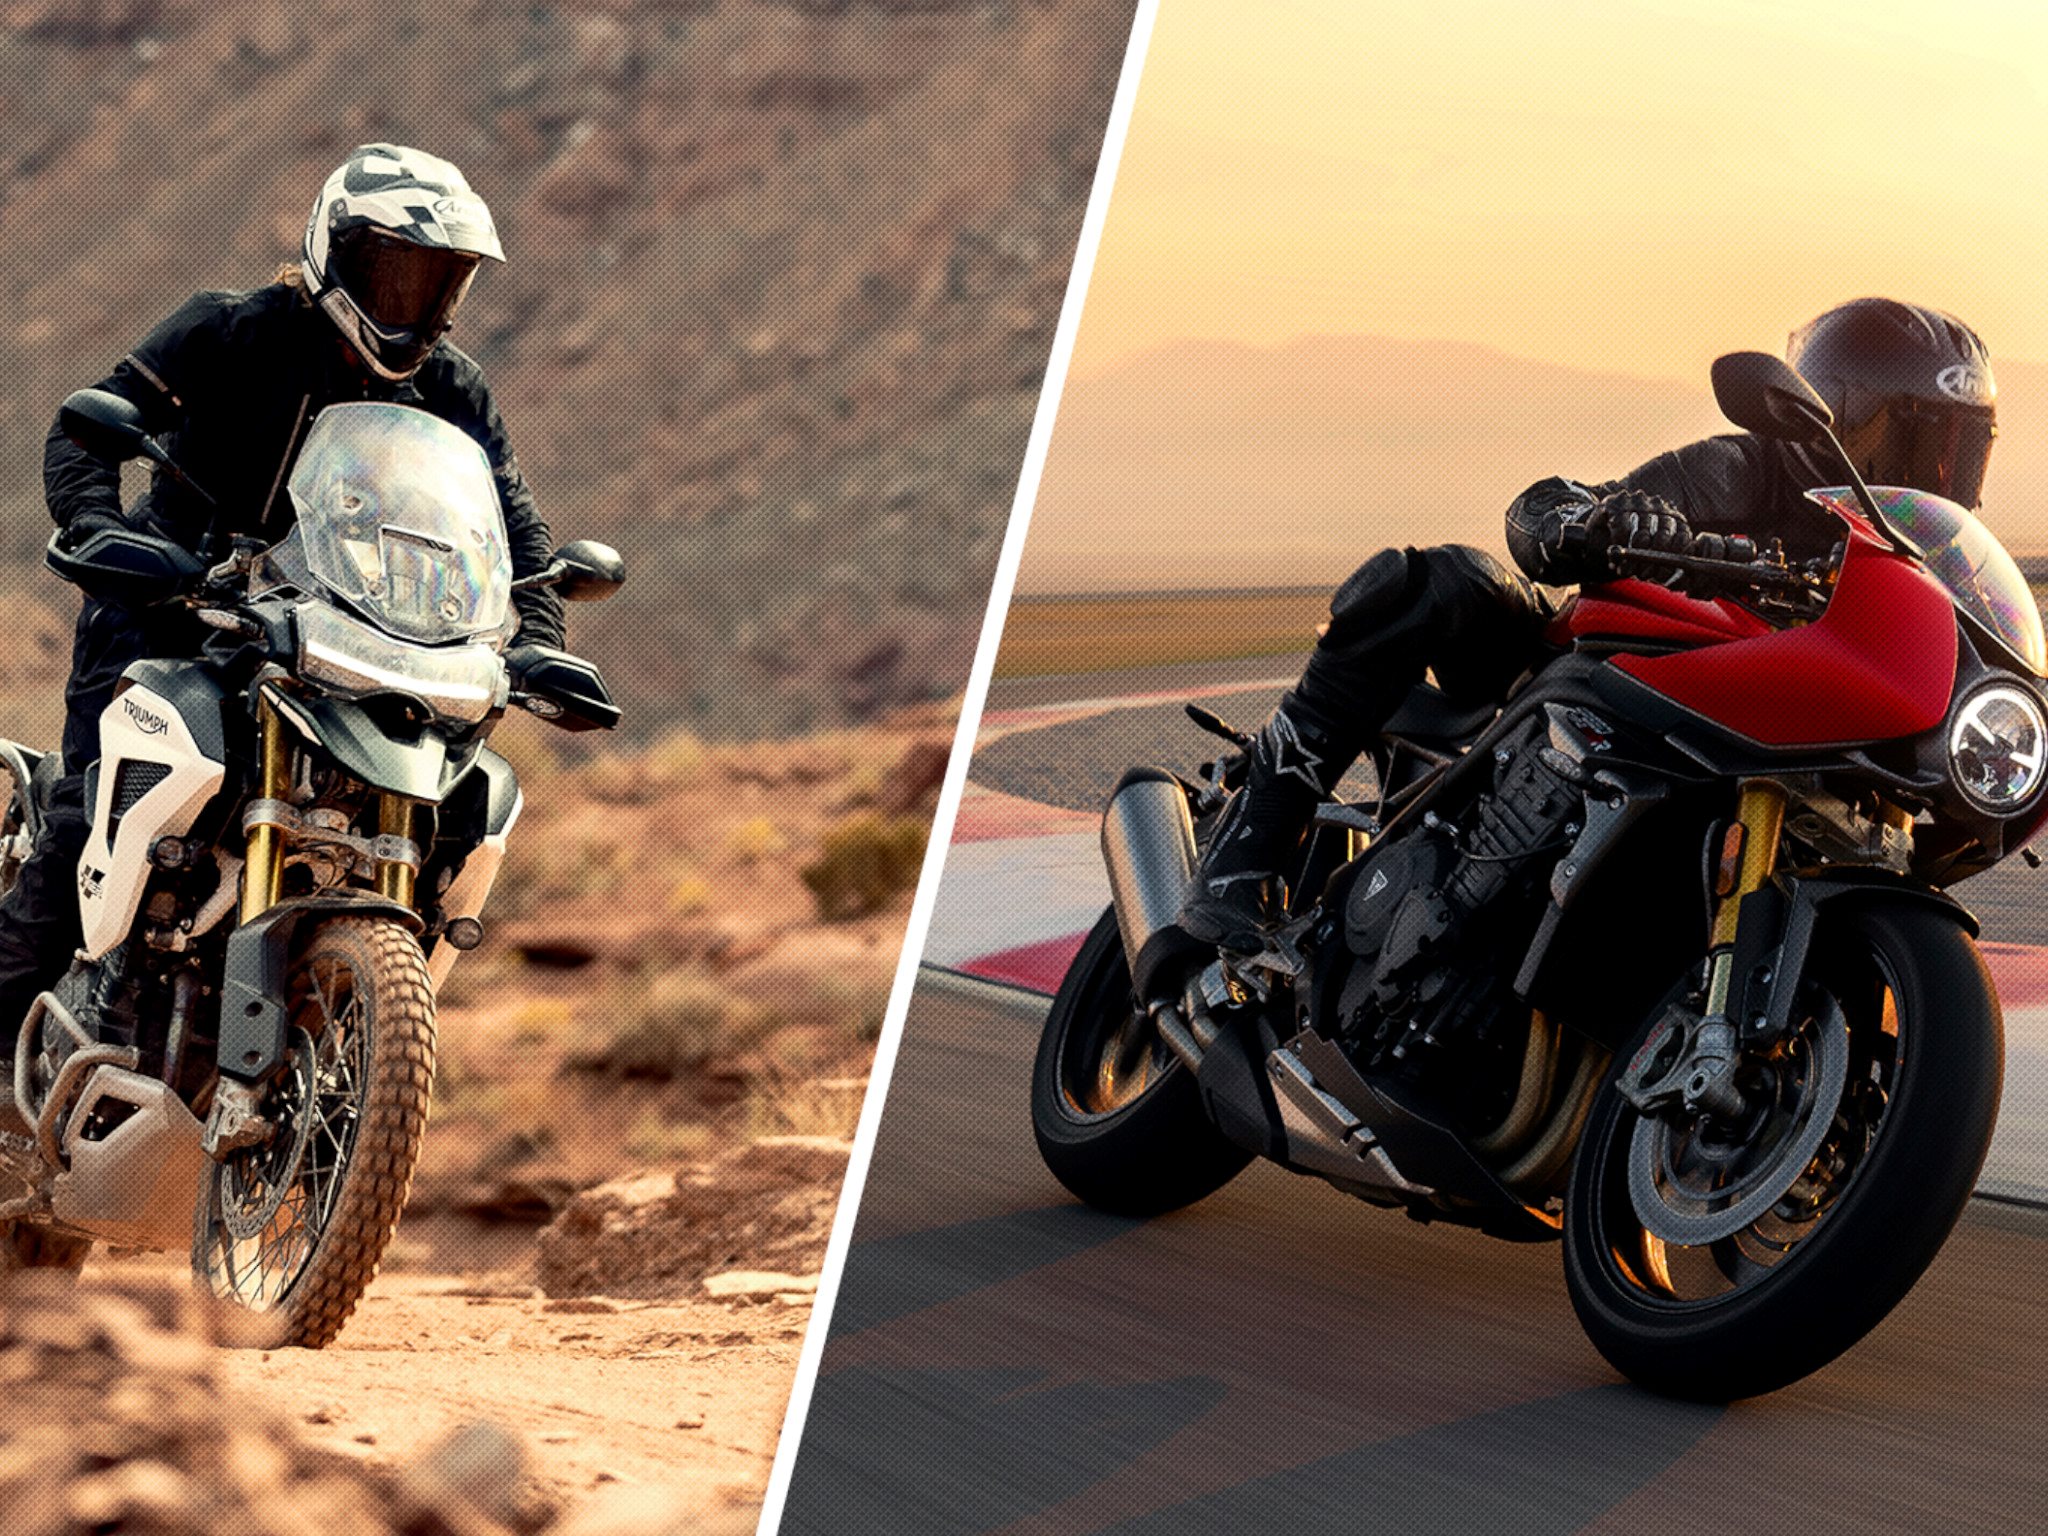 TRIUMPH RIDING EXPERIENCE EVENTS